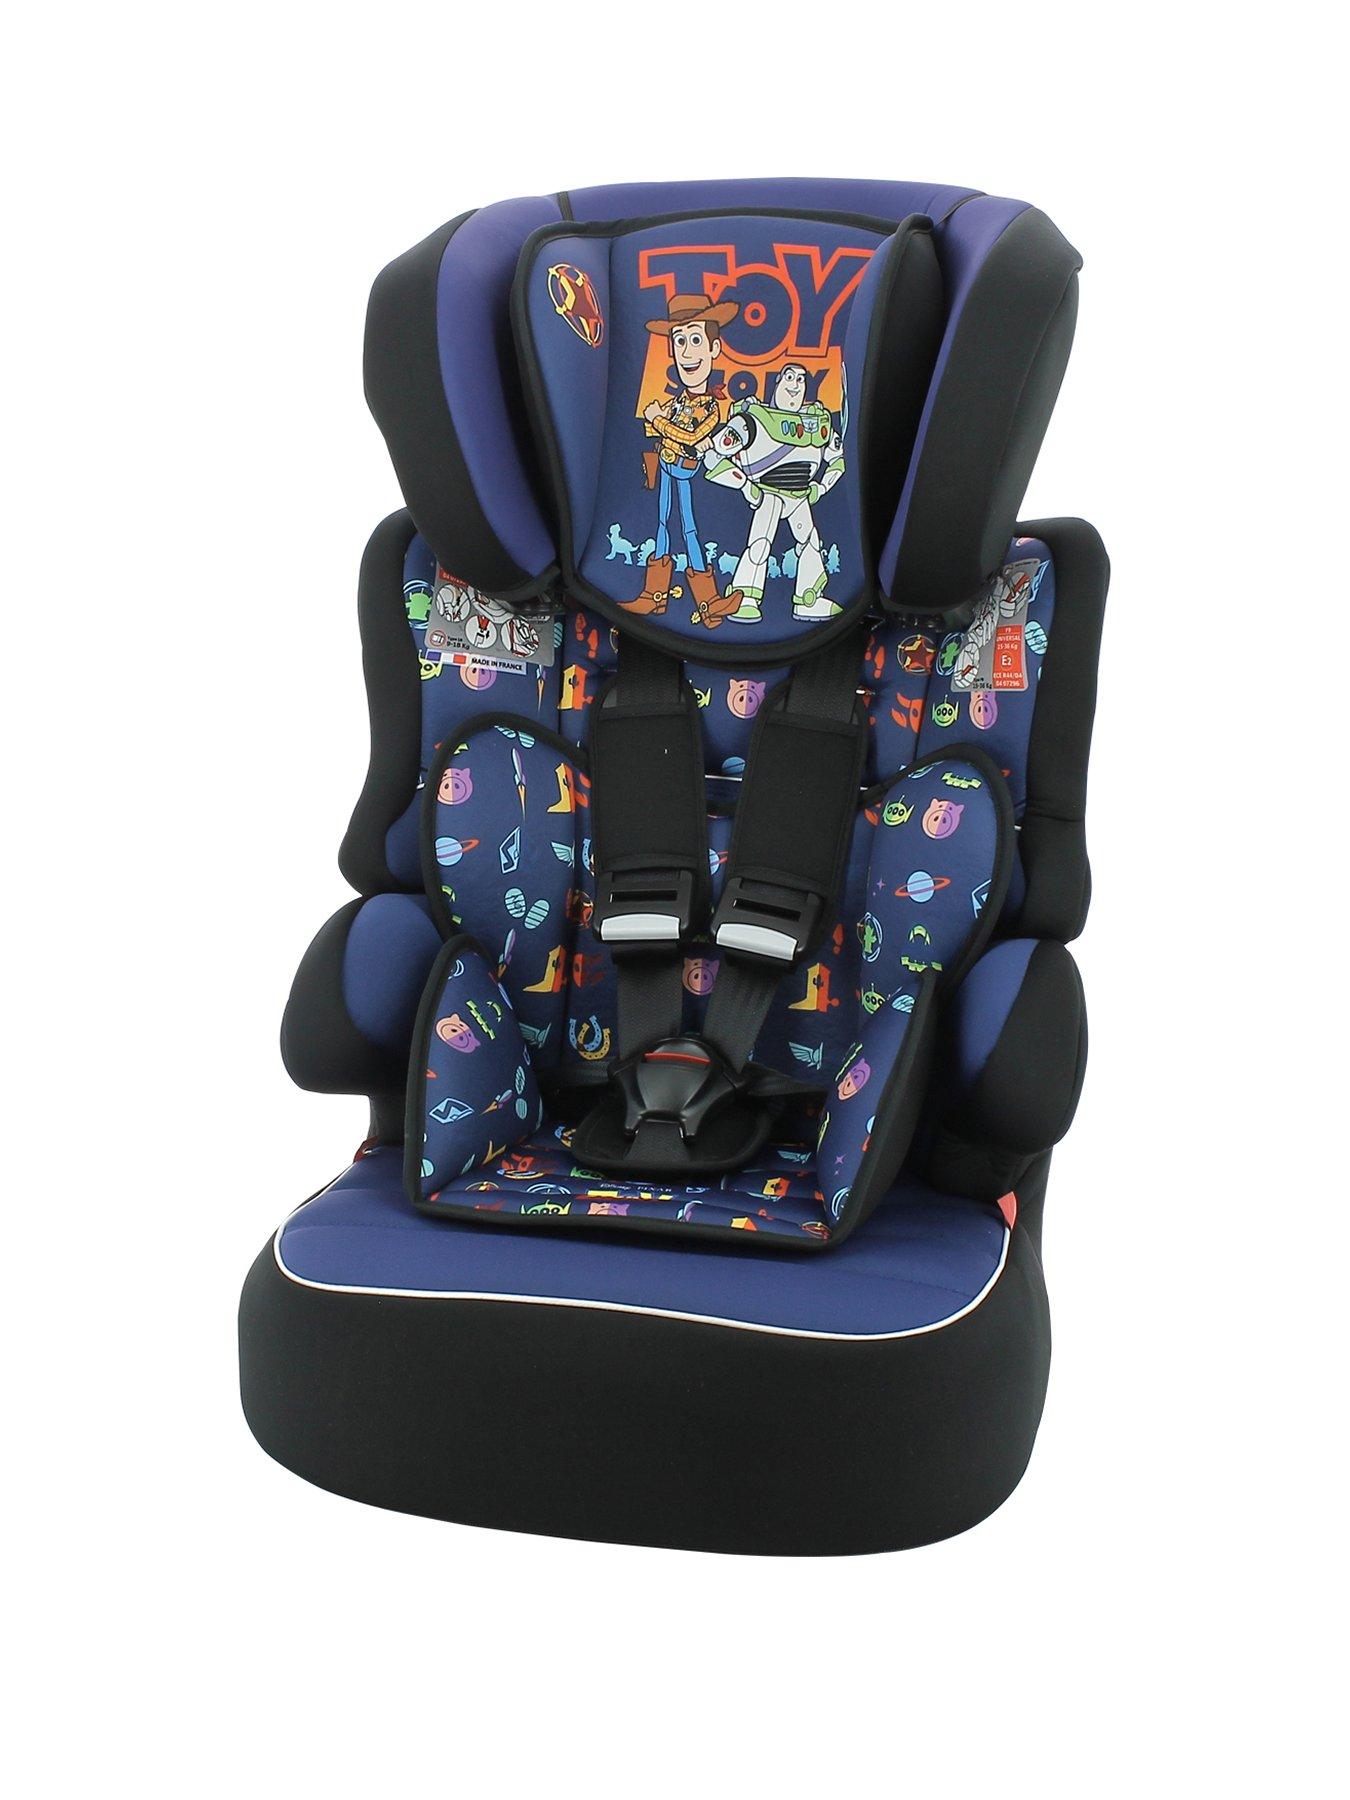 Toy Story Beline SP Luxe Group 123 High 